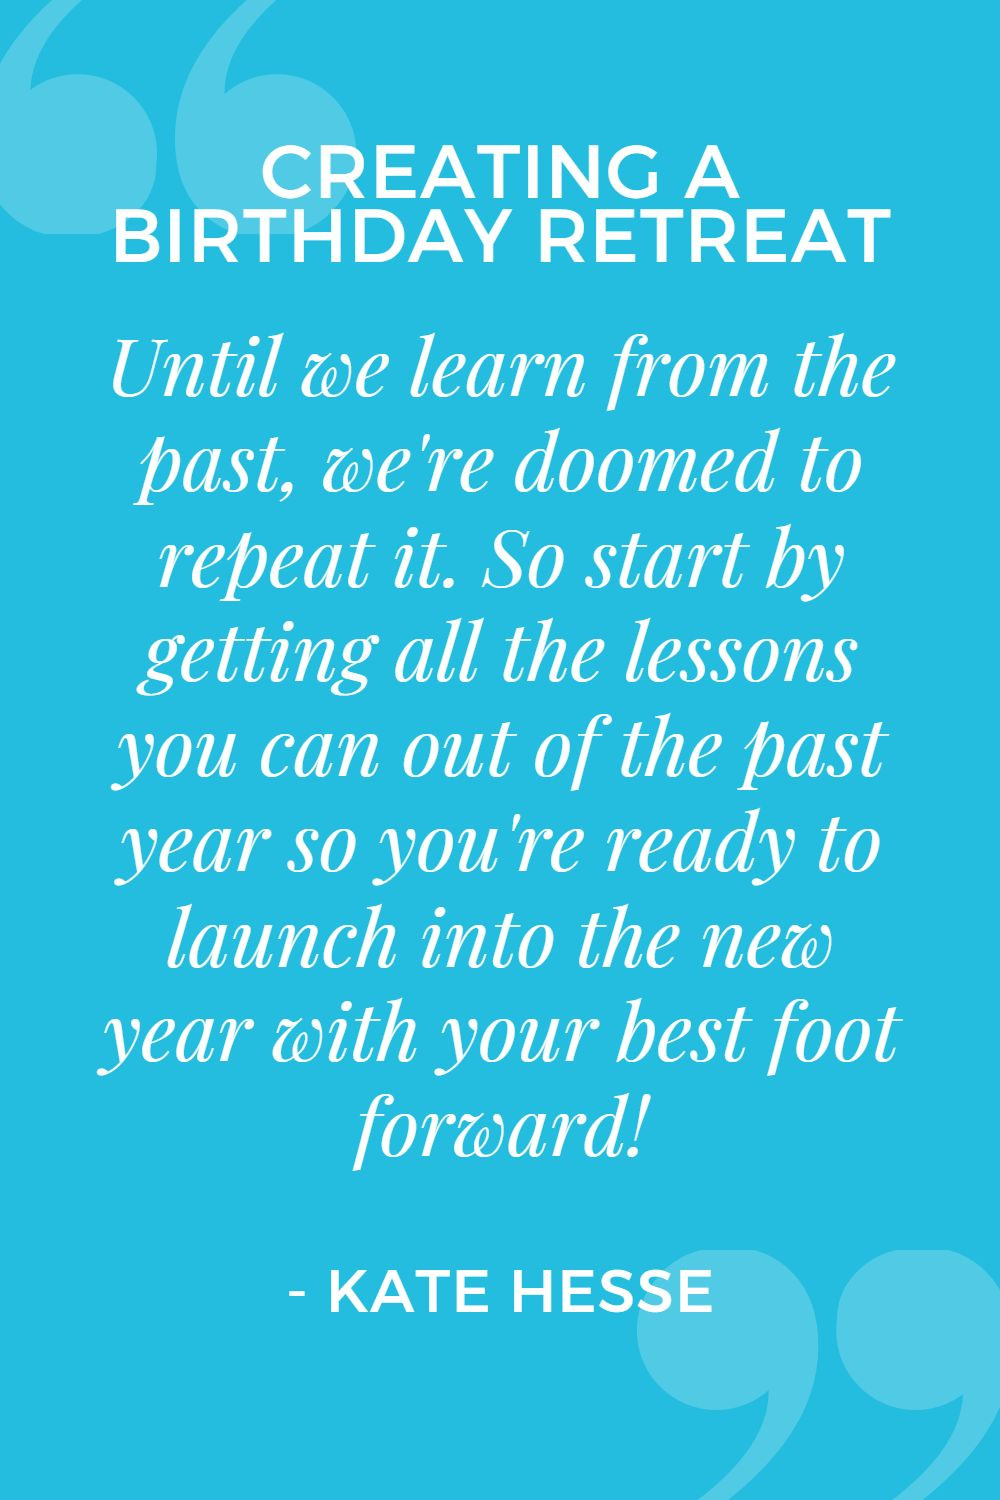 Until we learn from the past, we're doomed to repeat it. So start by getting all the lessons you can out of the past year so you're ready to launch into the new year with your best foot forward!